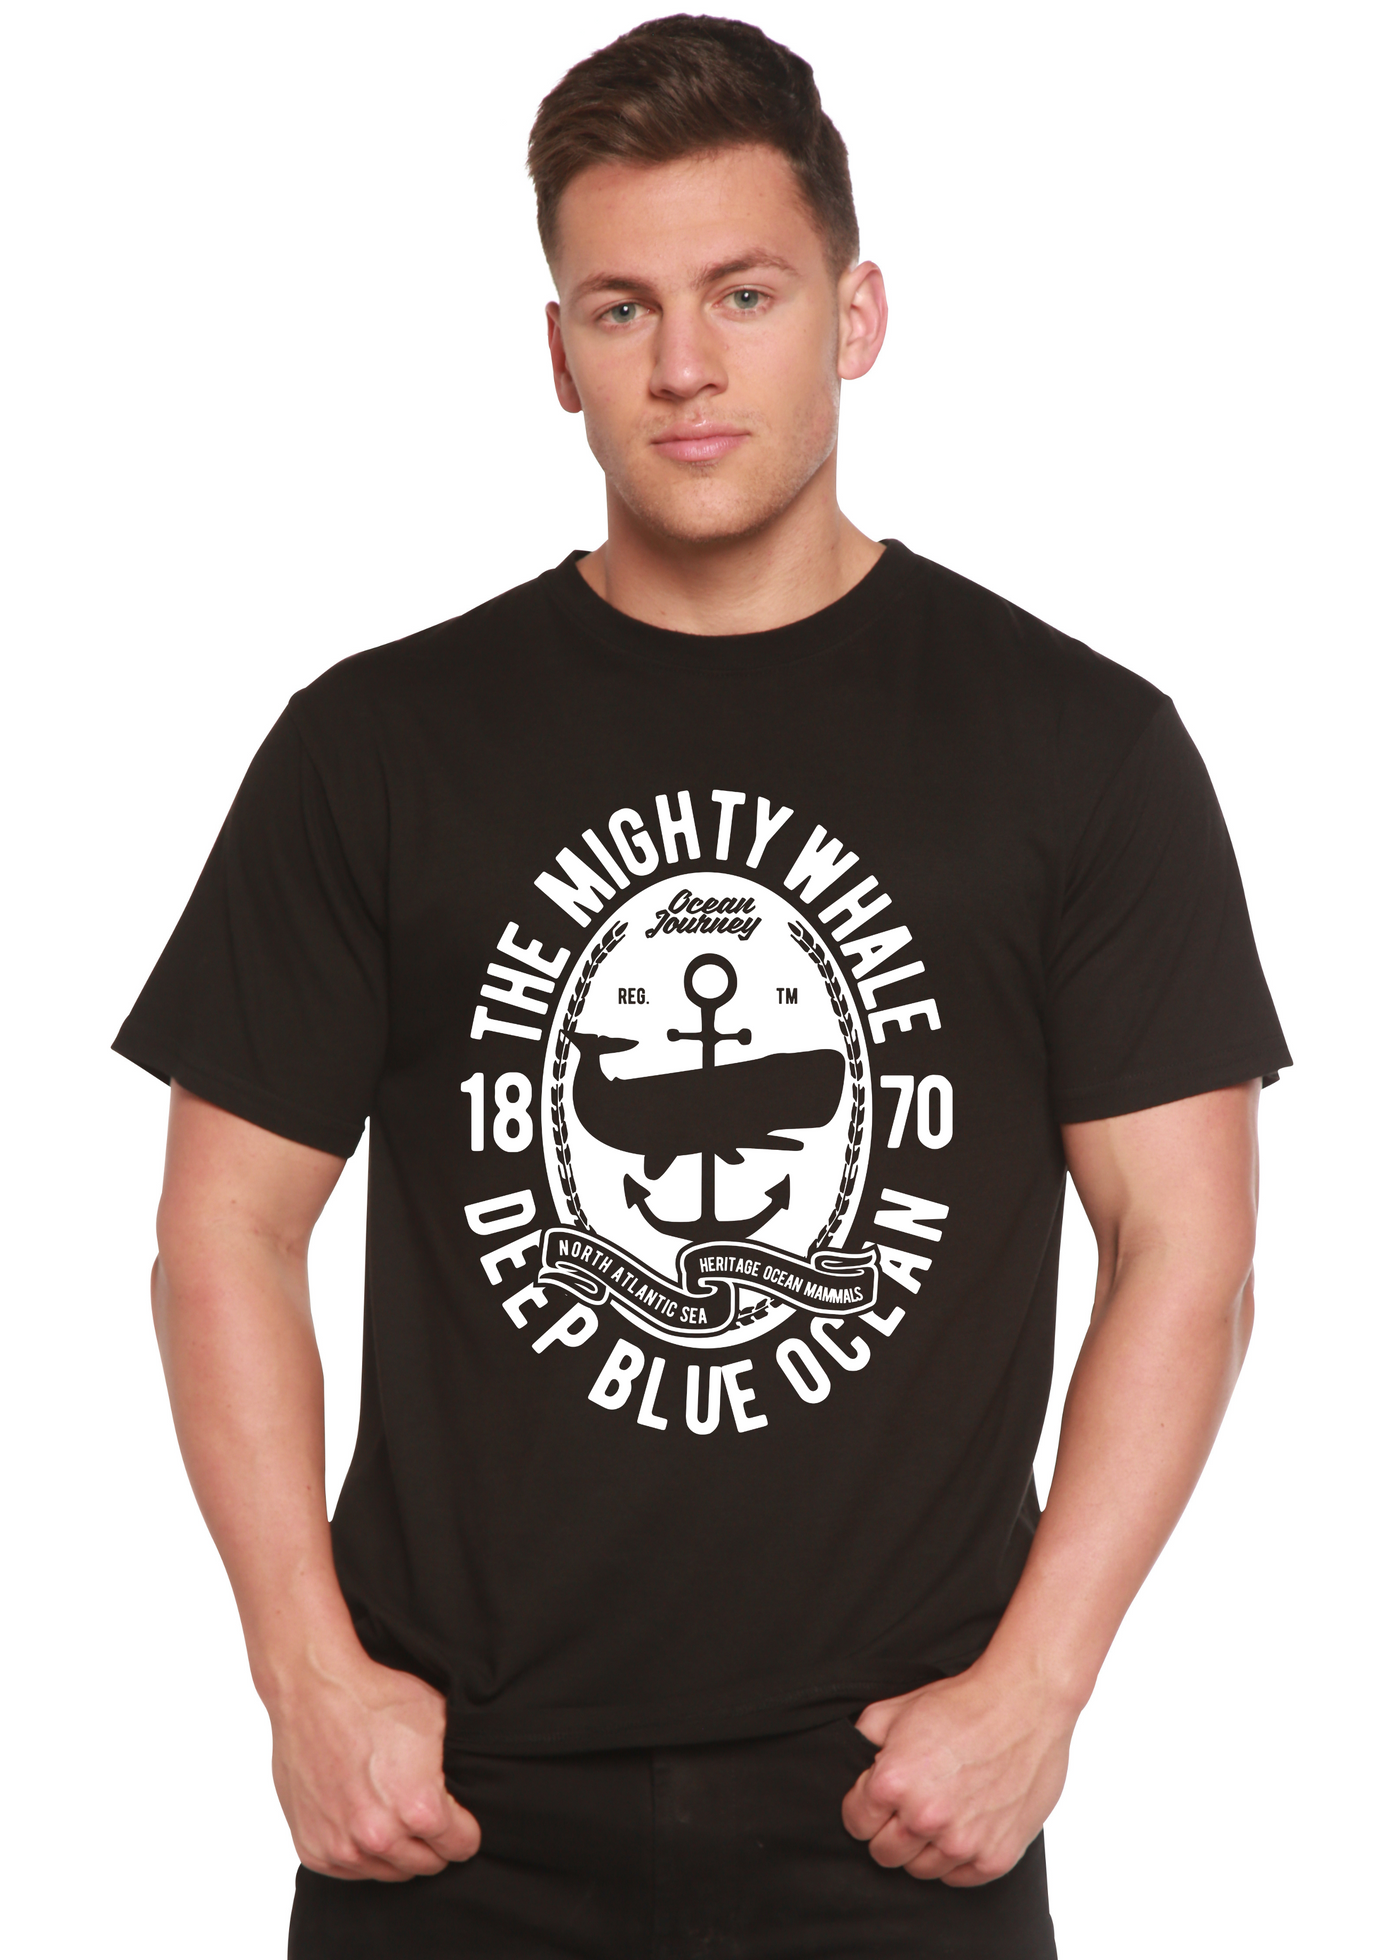 The Mighty Whale men's bamboo tshirt black